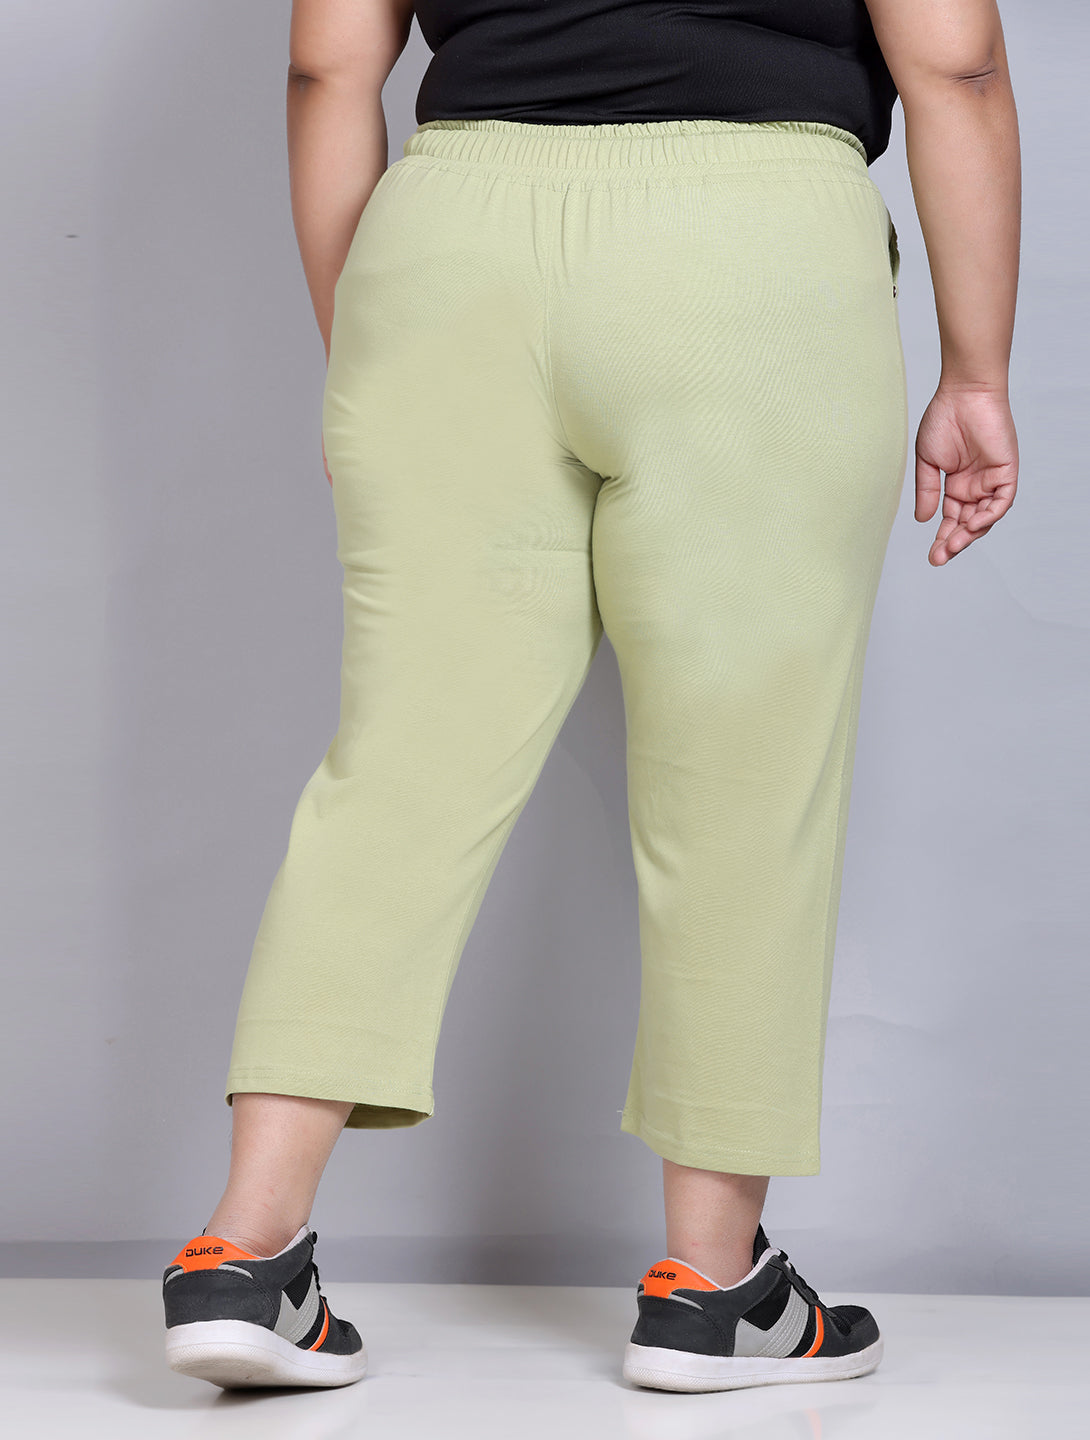 Buy TWGE  Lace Pant For Women  Cigarette pants  Straight Pant  Causal   Skin  3XL Size Online at Best Prices in India  JioMart